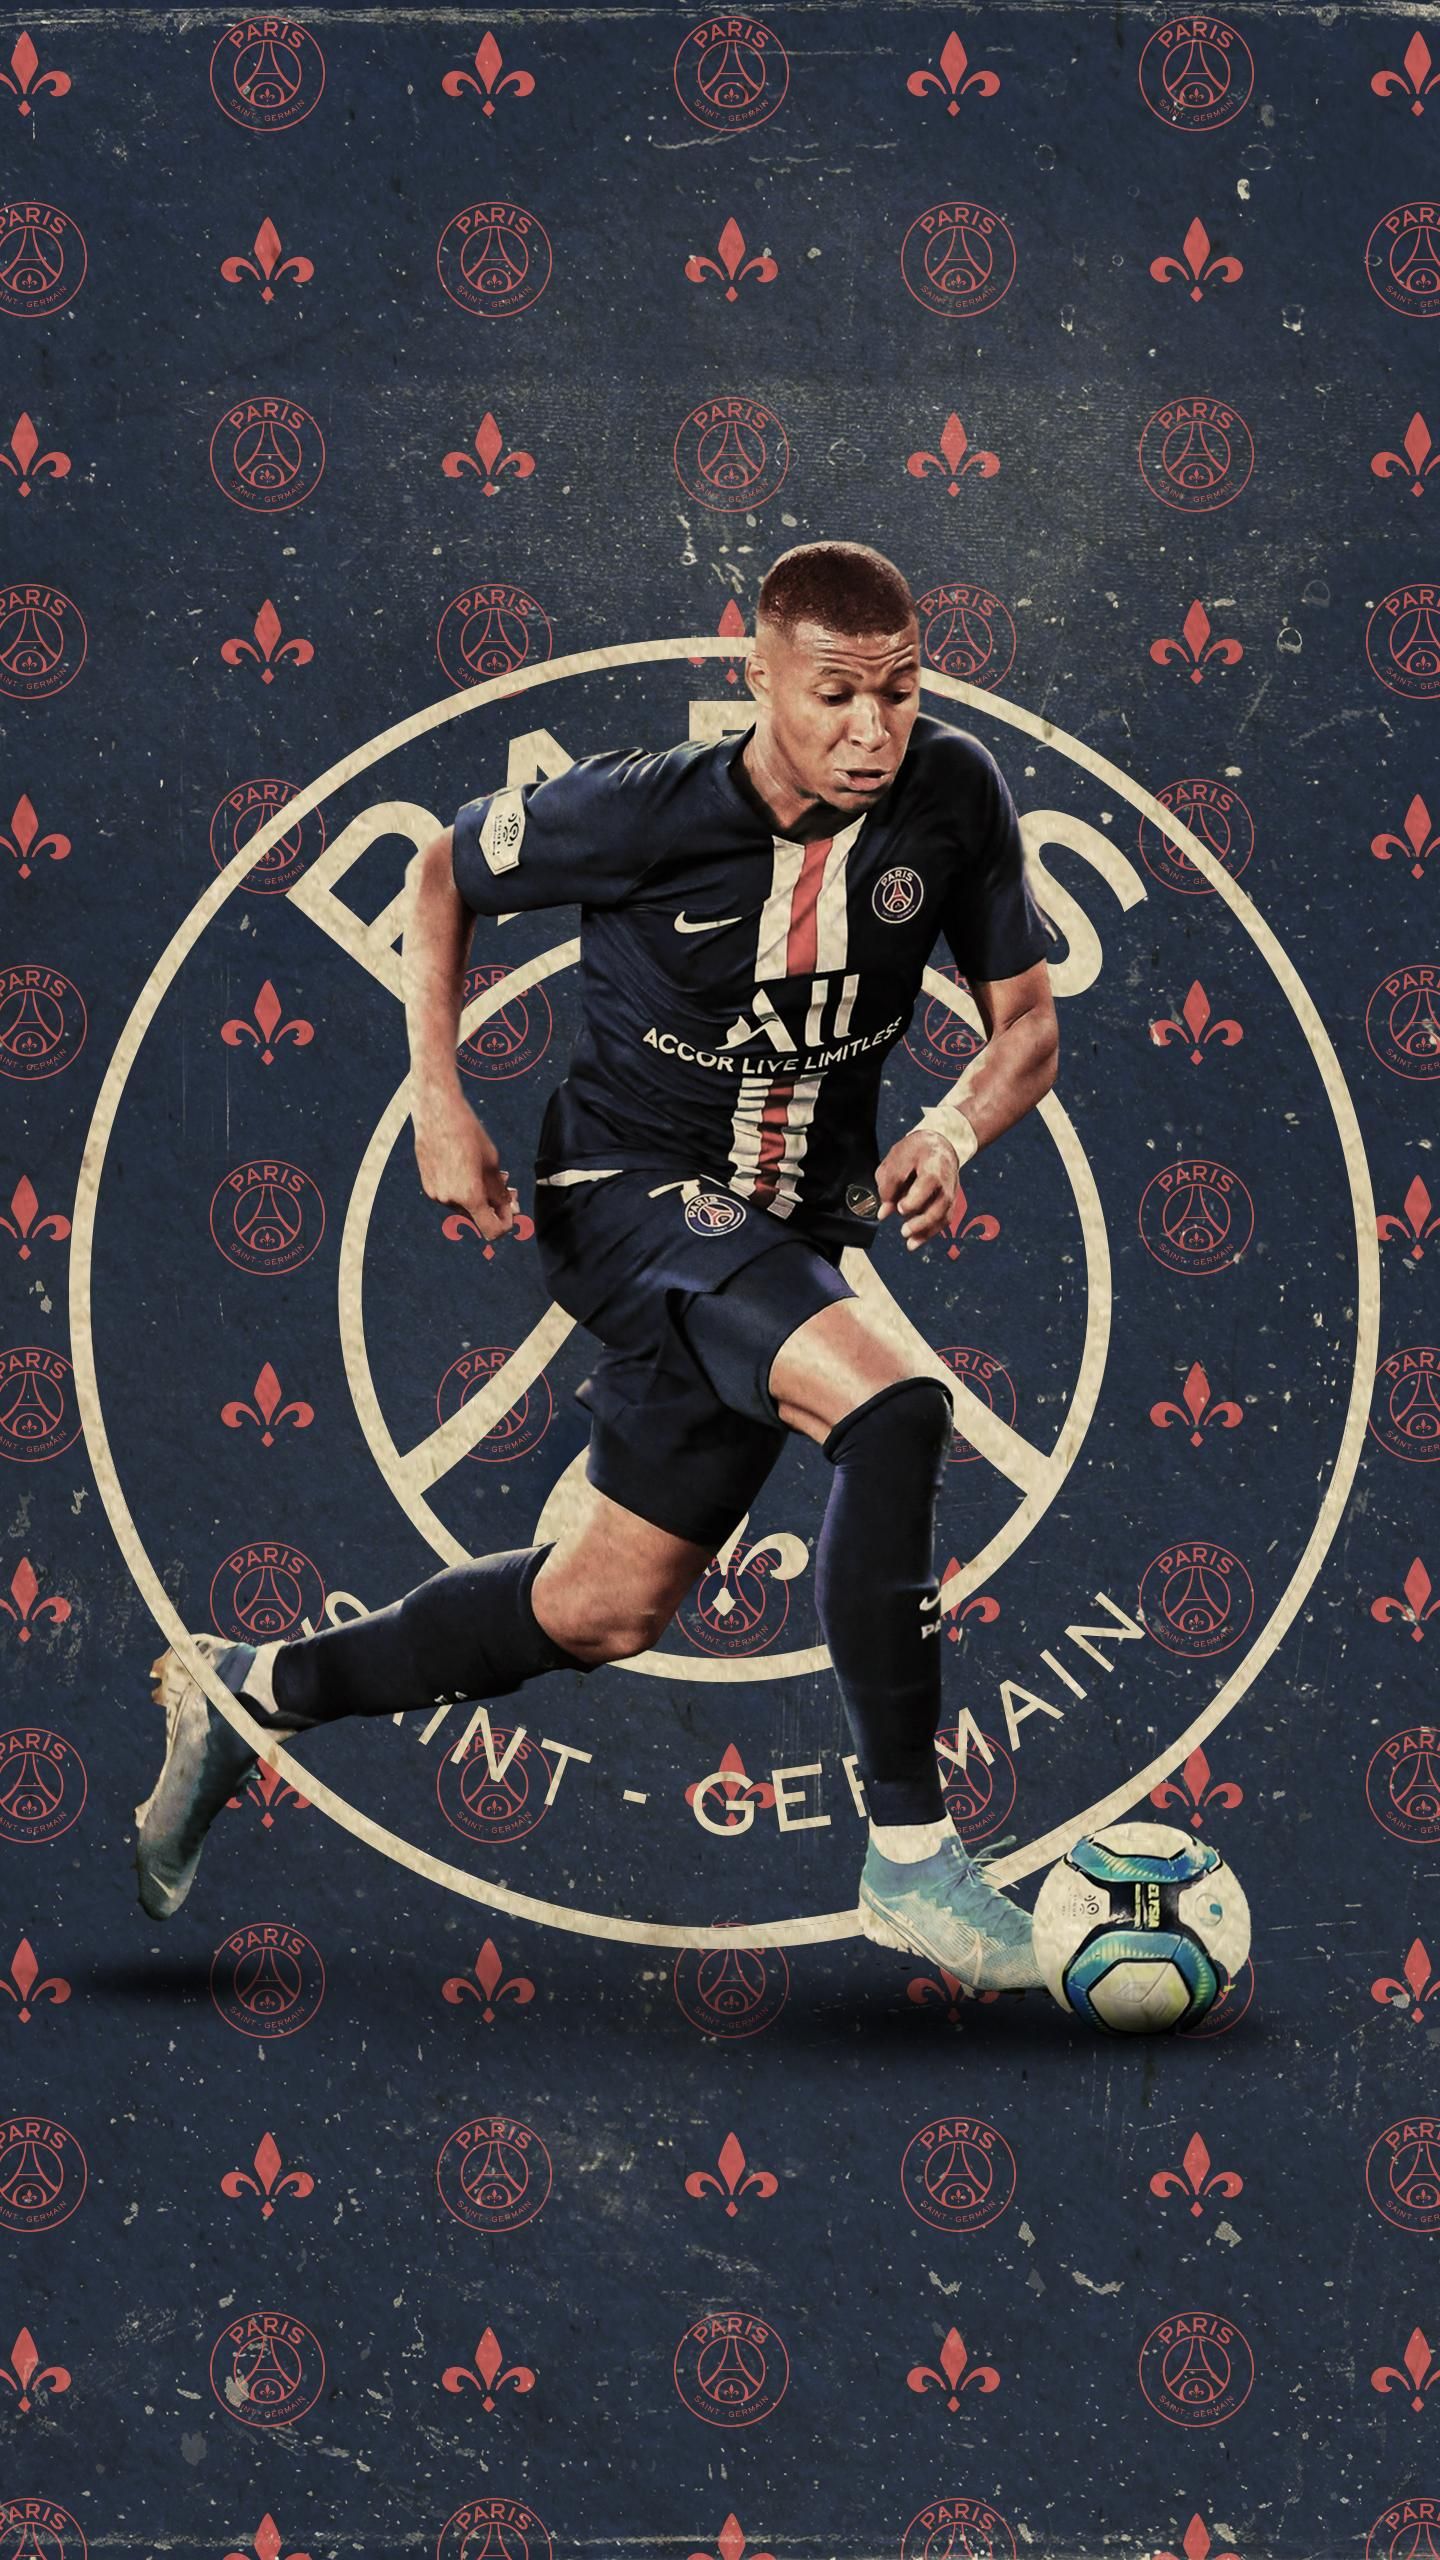 Wallpaper ID 393227  Sports Kylian Mbappé Phone Wallpaper Soccer  French 1080x1920 free download